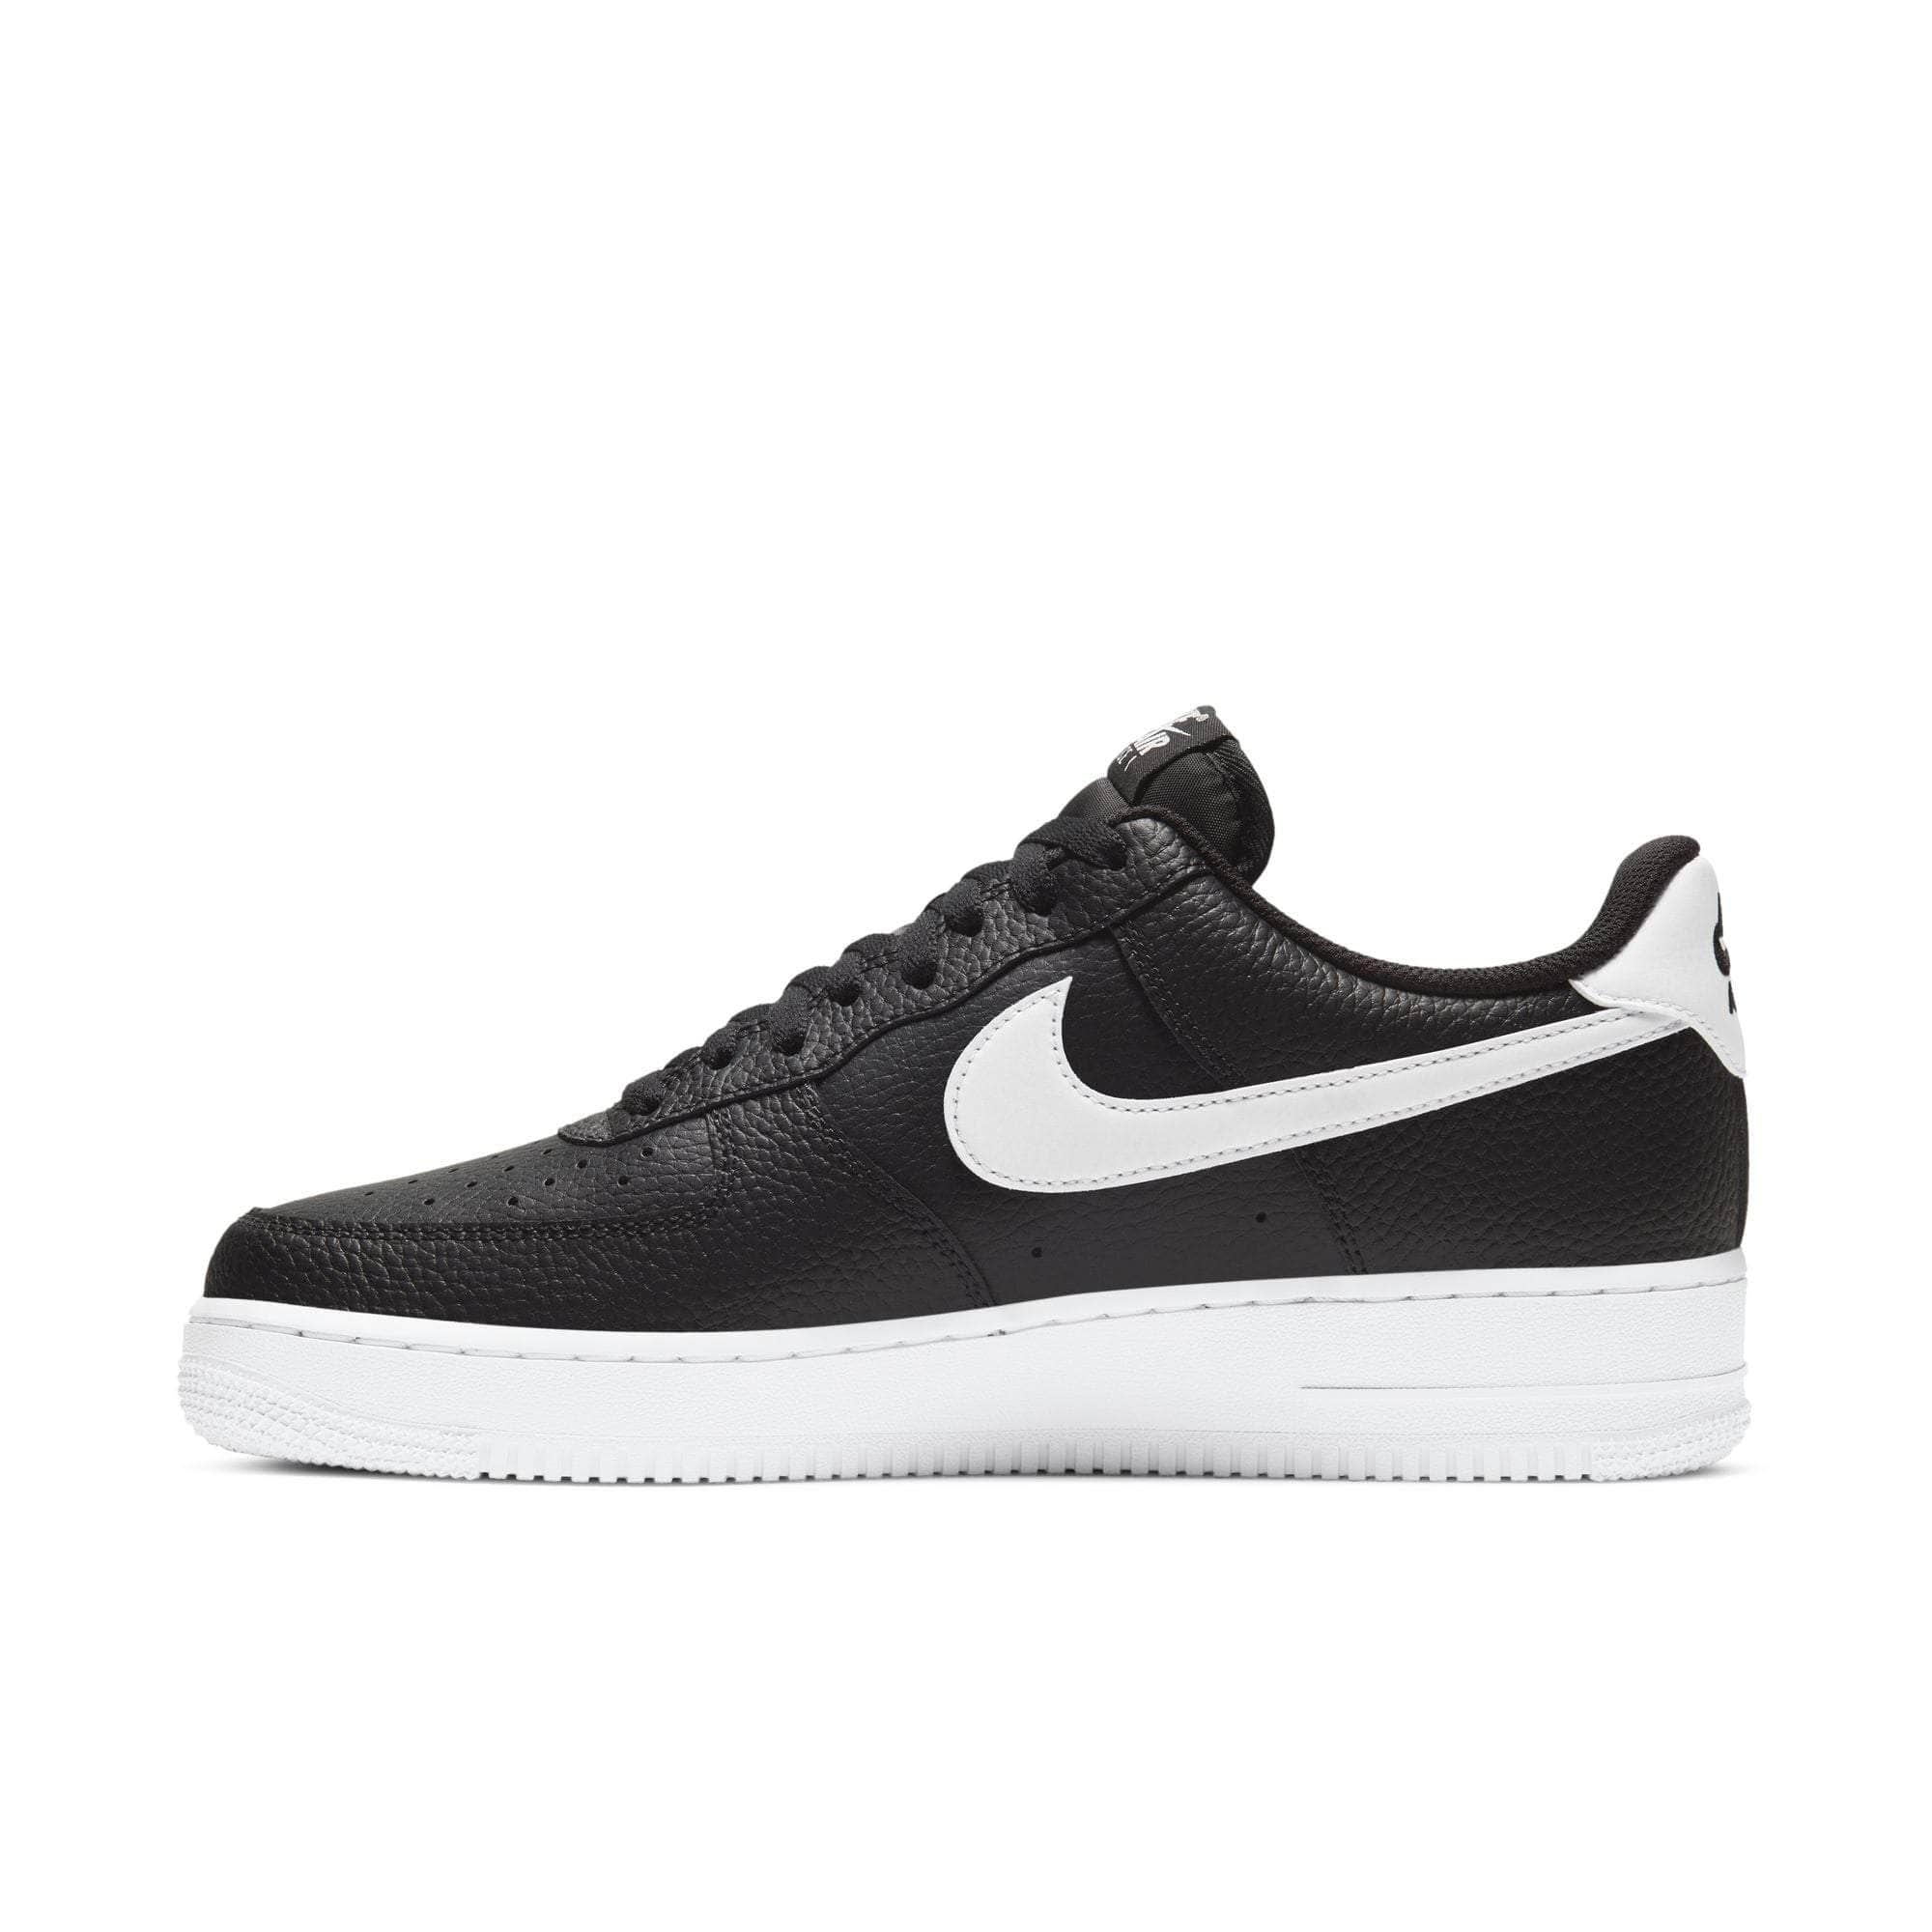 Nike Air Force 1 Low '07 Black White Pebbled Leather - Men's - GBNY